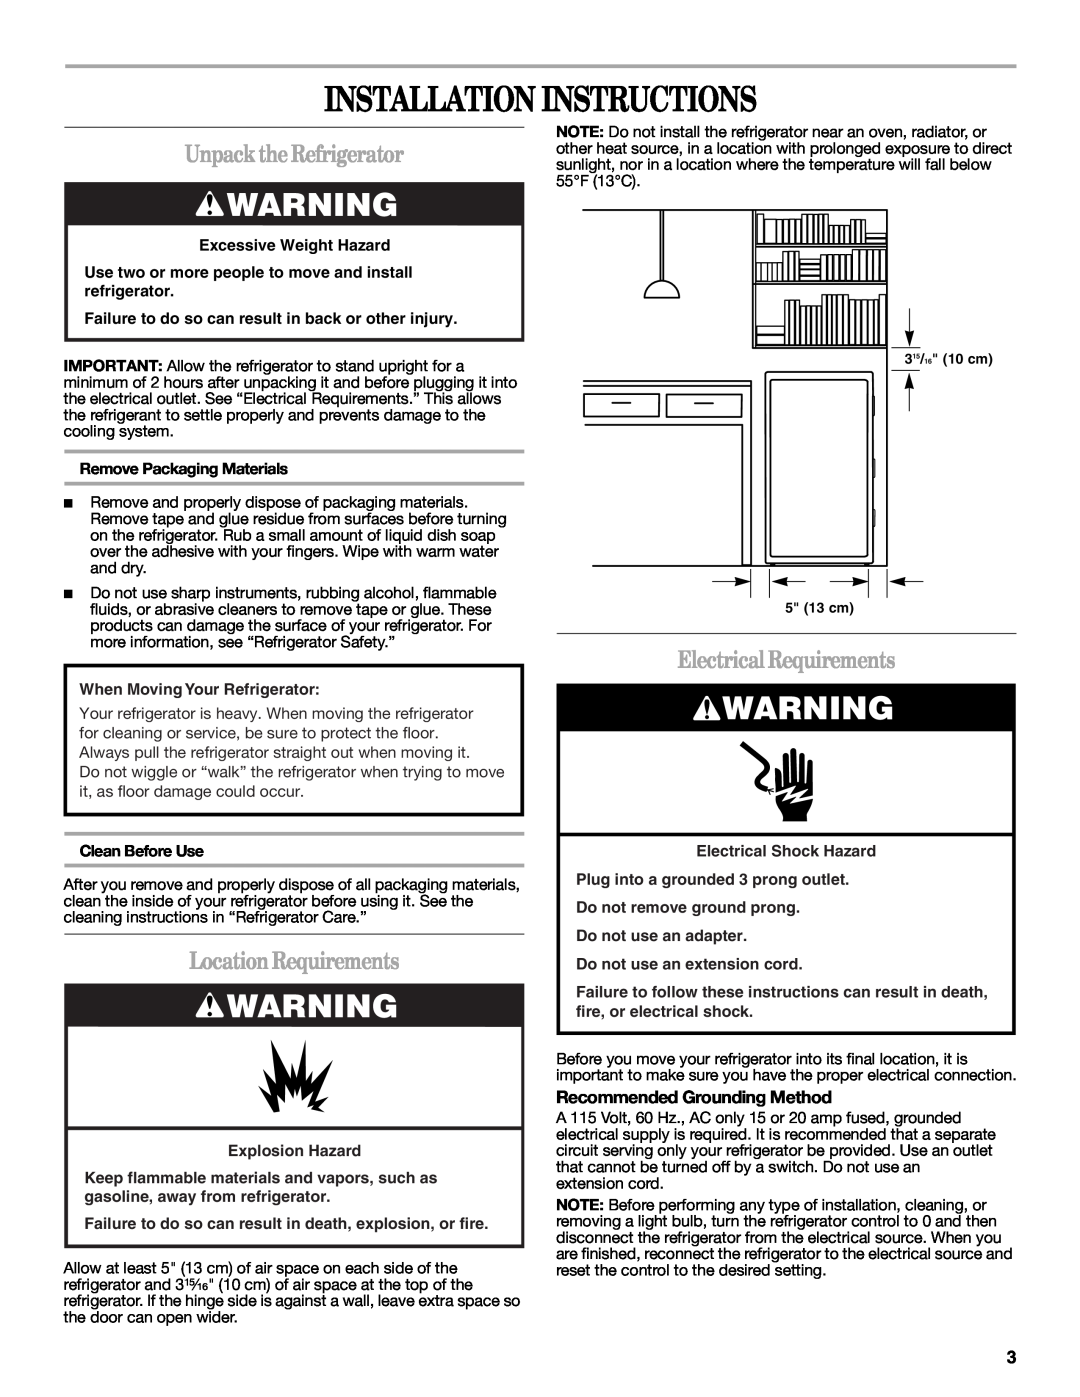 Whirlpool EL02CCXPB00 Installation Instructions, UnpacktheRefrigerator, LocationRequirements, Electrical Requirements 